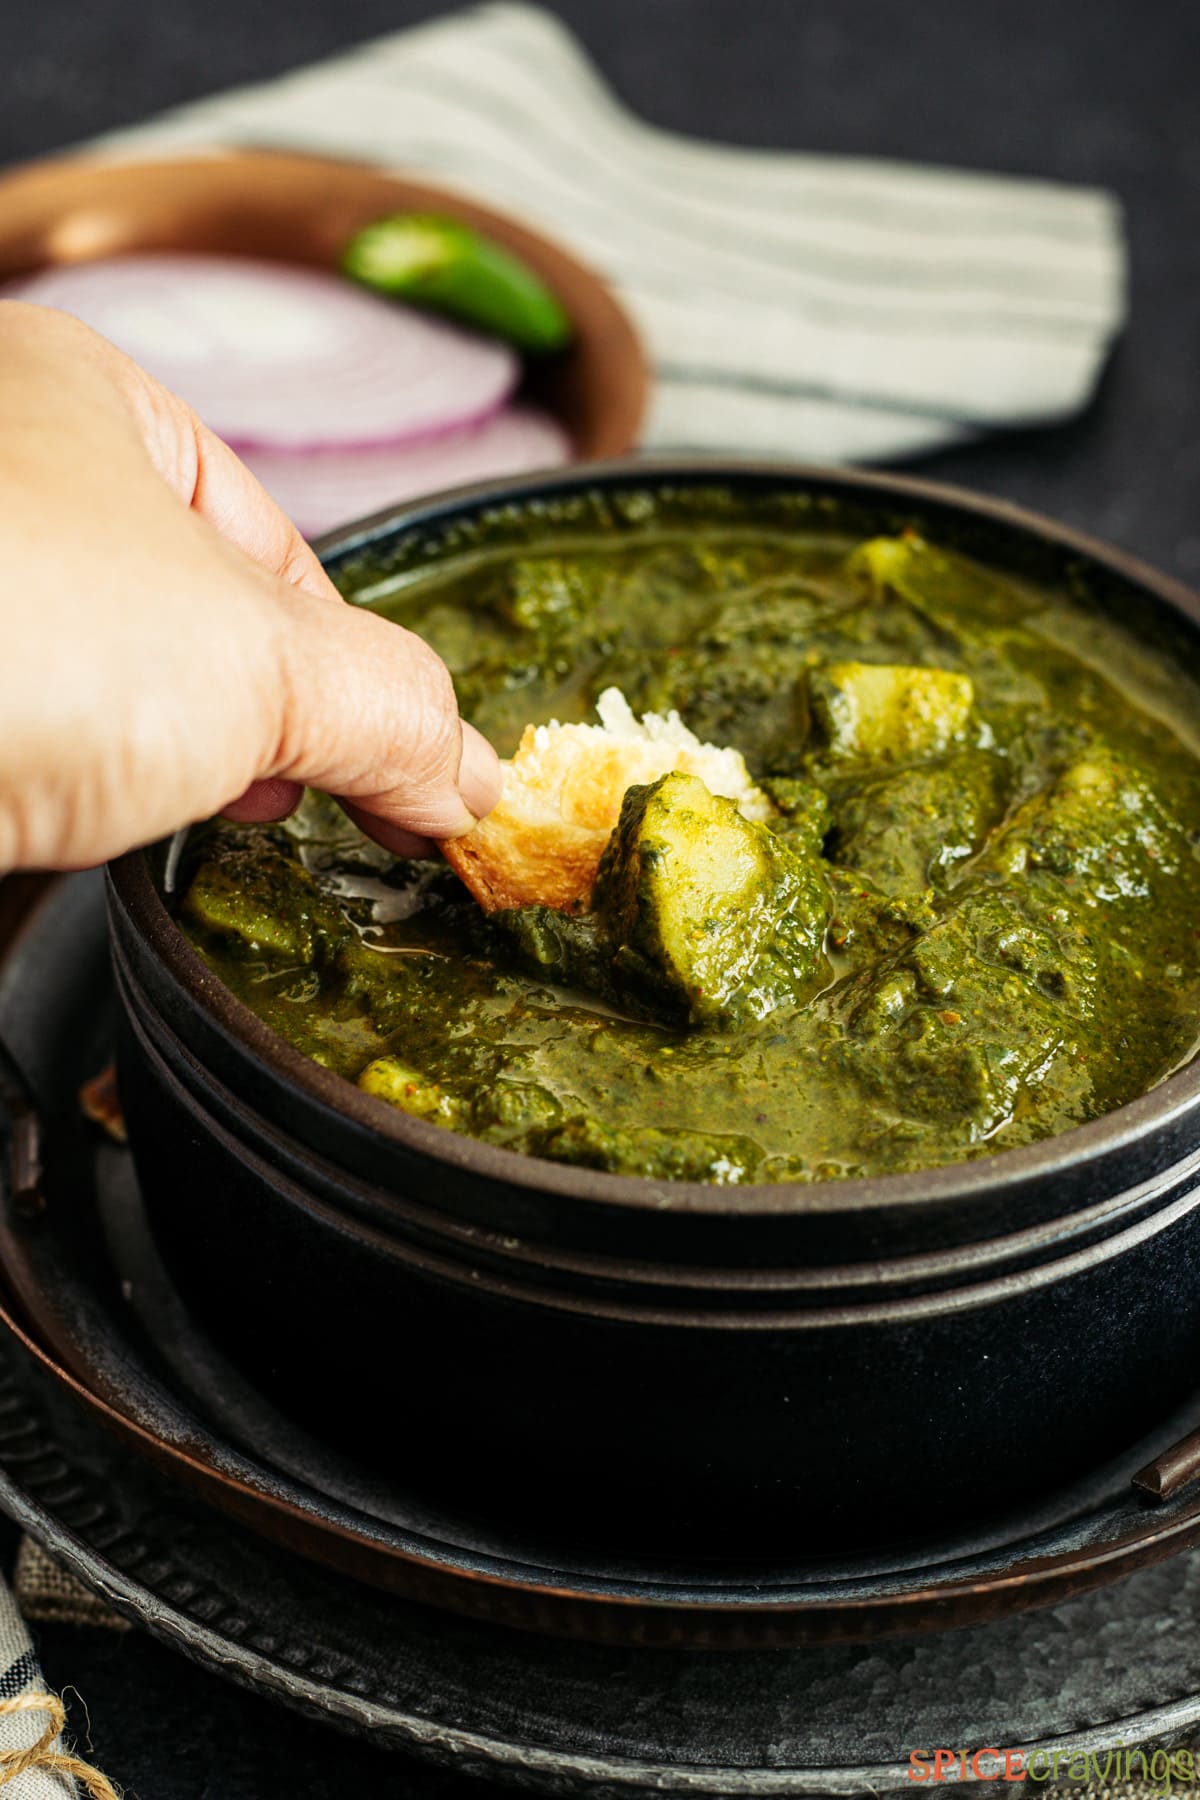 Scooping Saag Aloo with Naan